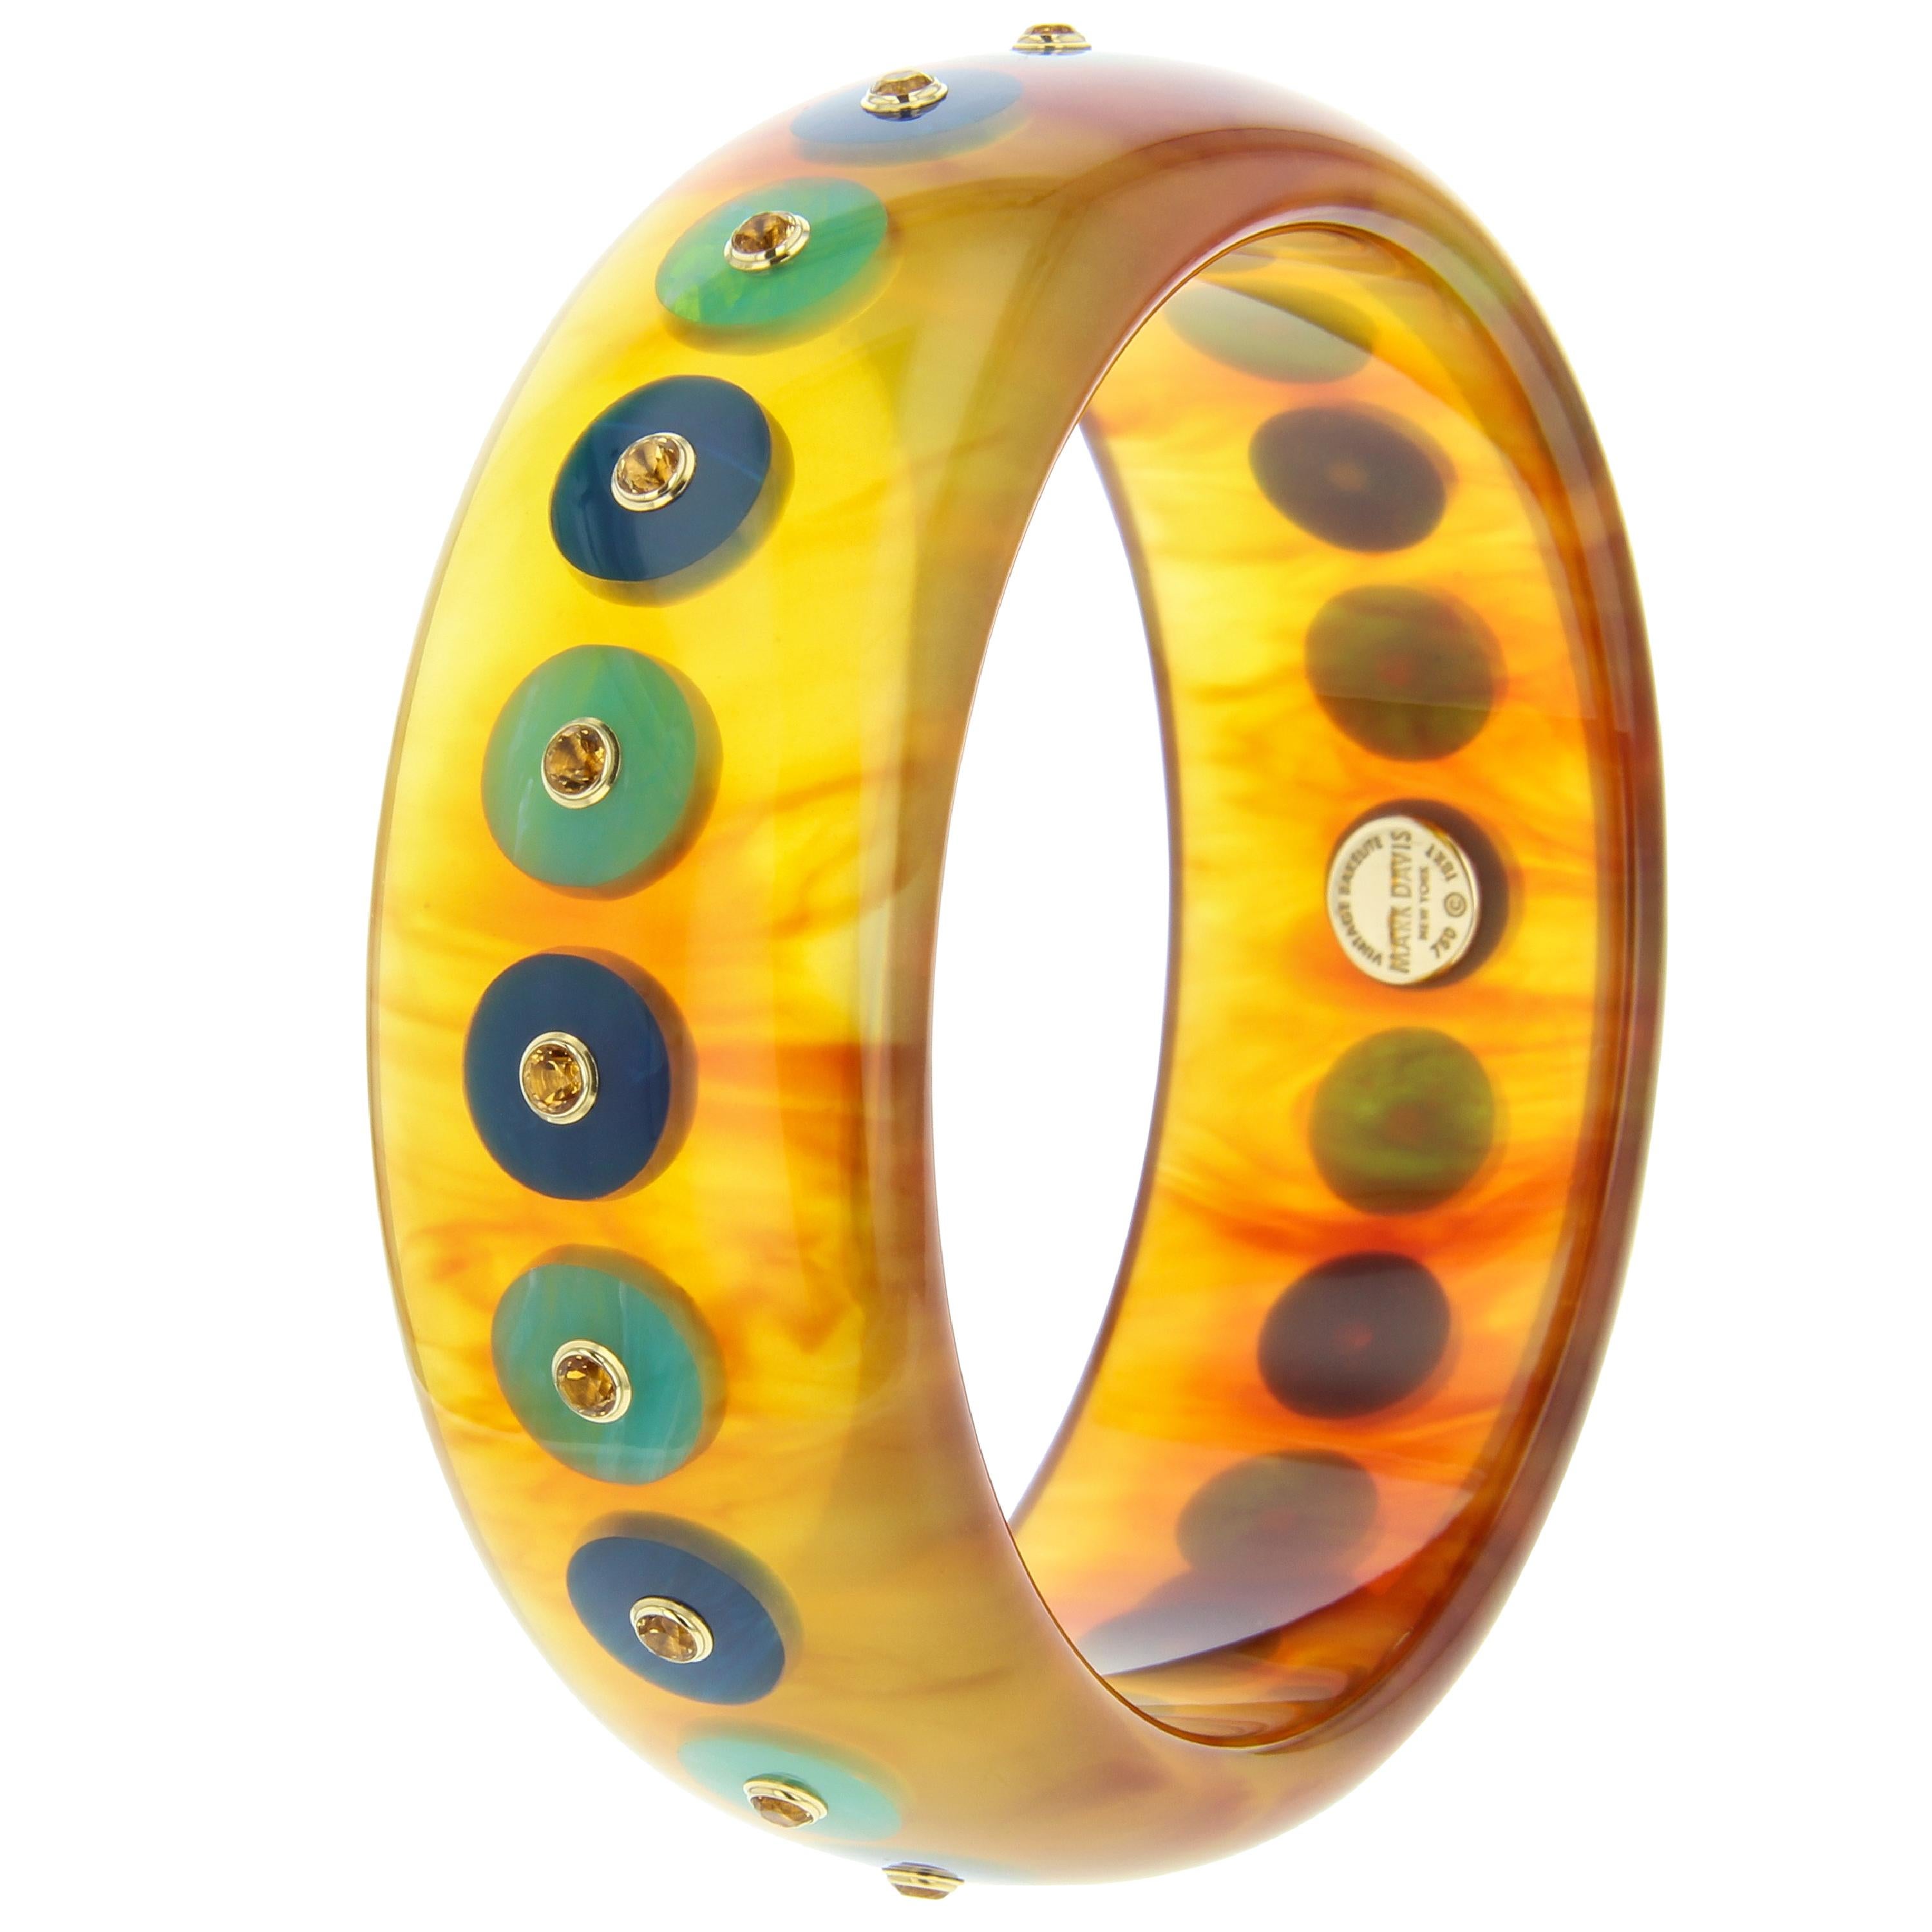 This striking Mark Davis bangle was handcrafted using a beautiful blonde tortoiseshell color vintage bakelite inlaid with blue bakelite polka dots centered with citrine set in individual 18k yellow gold bezels.

Full details below:
• From the Mark